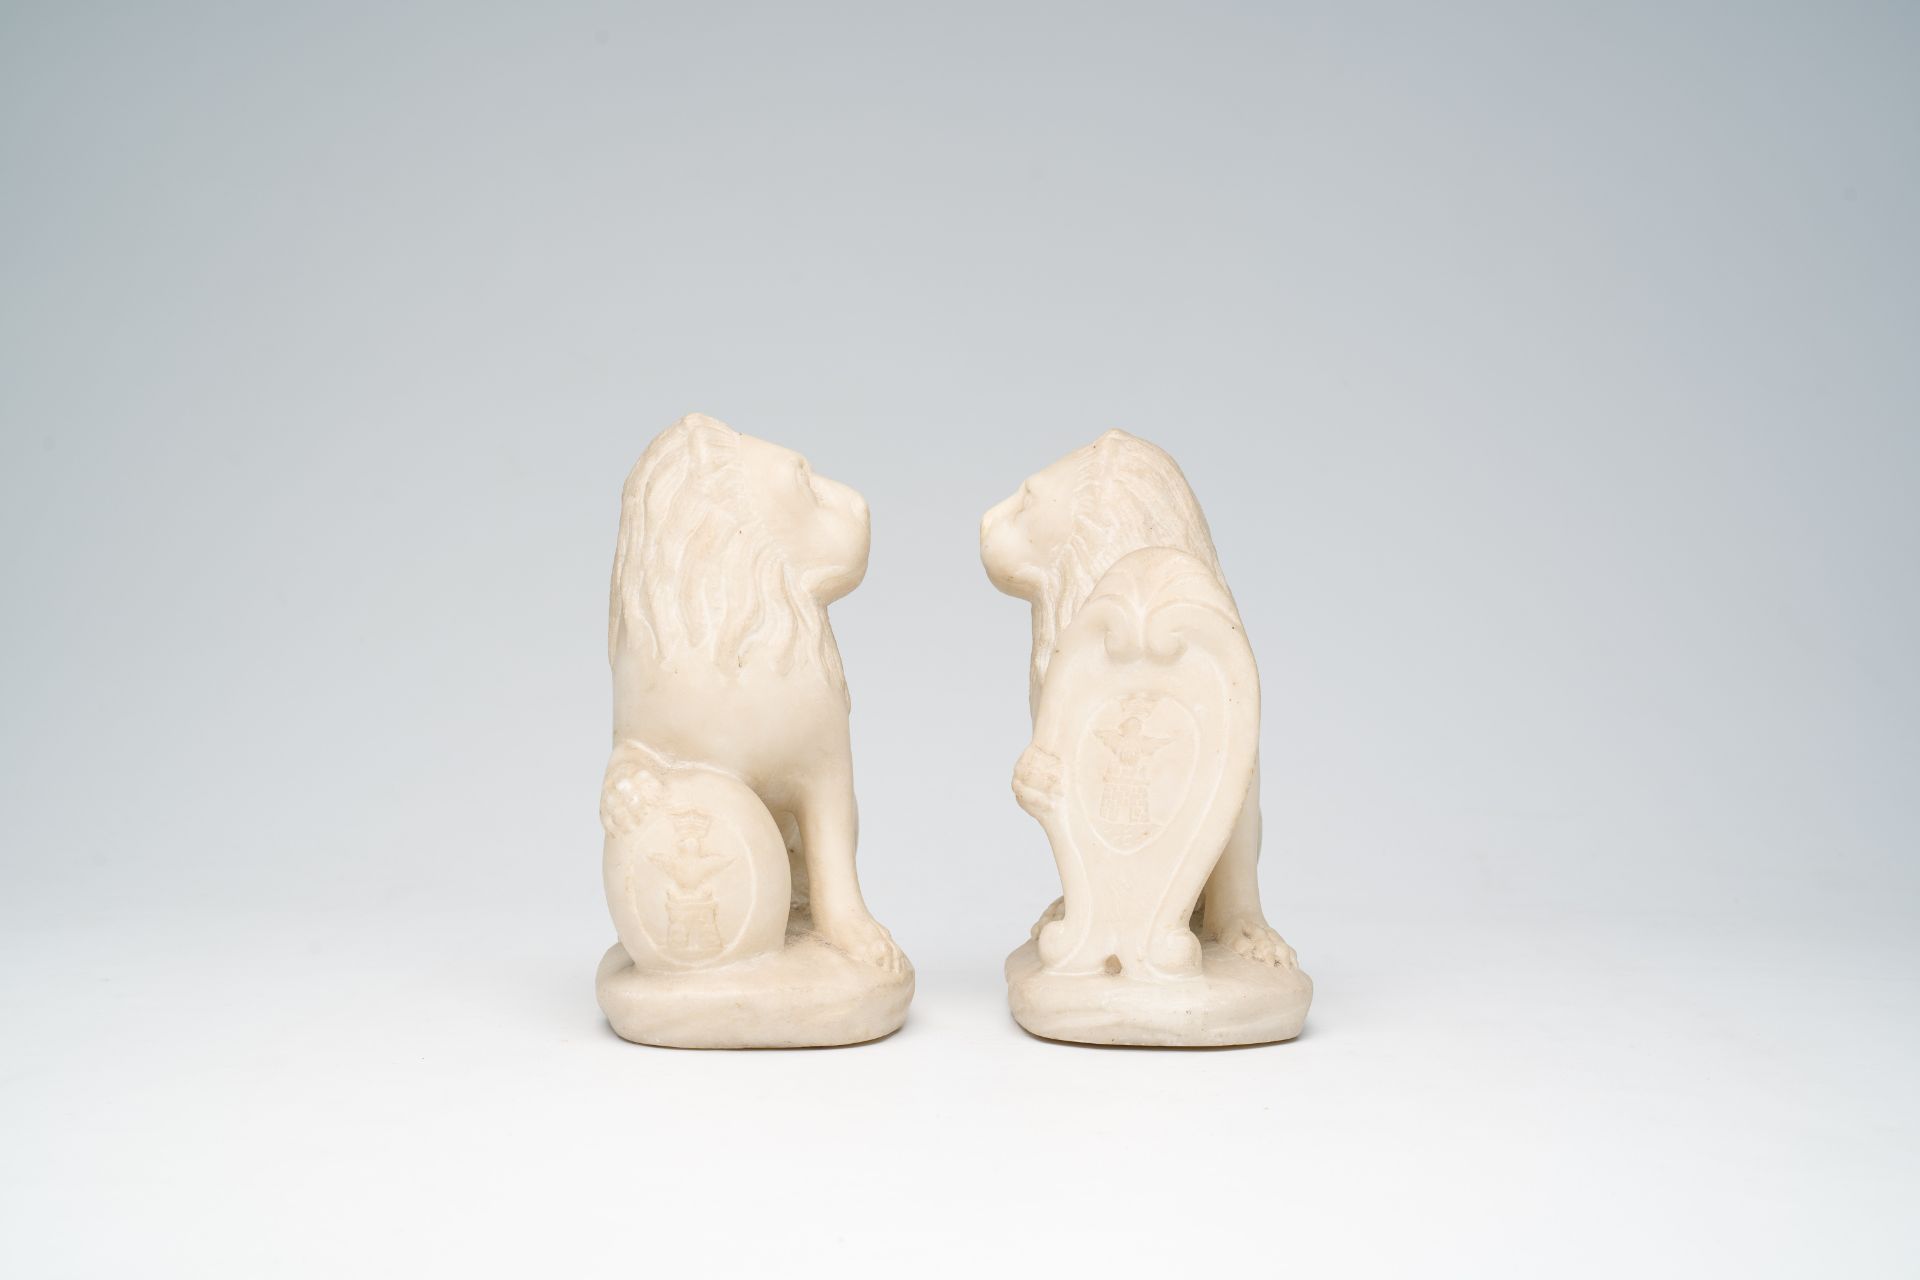 A pair of Italian marble lions holding shields with coats of arms, 19th C. - Image 5 of 8